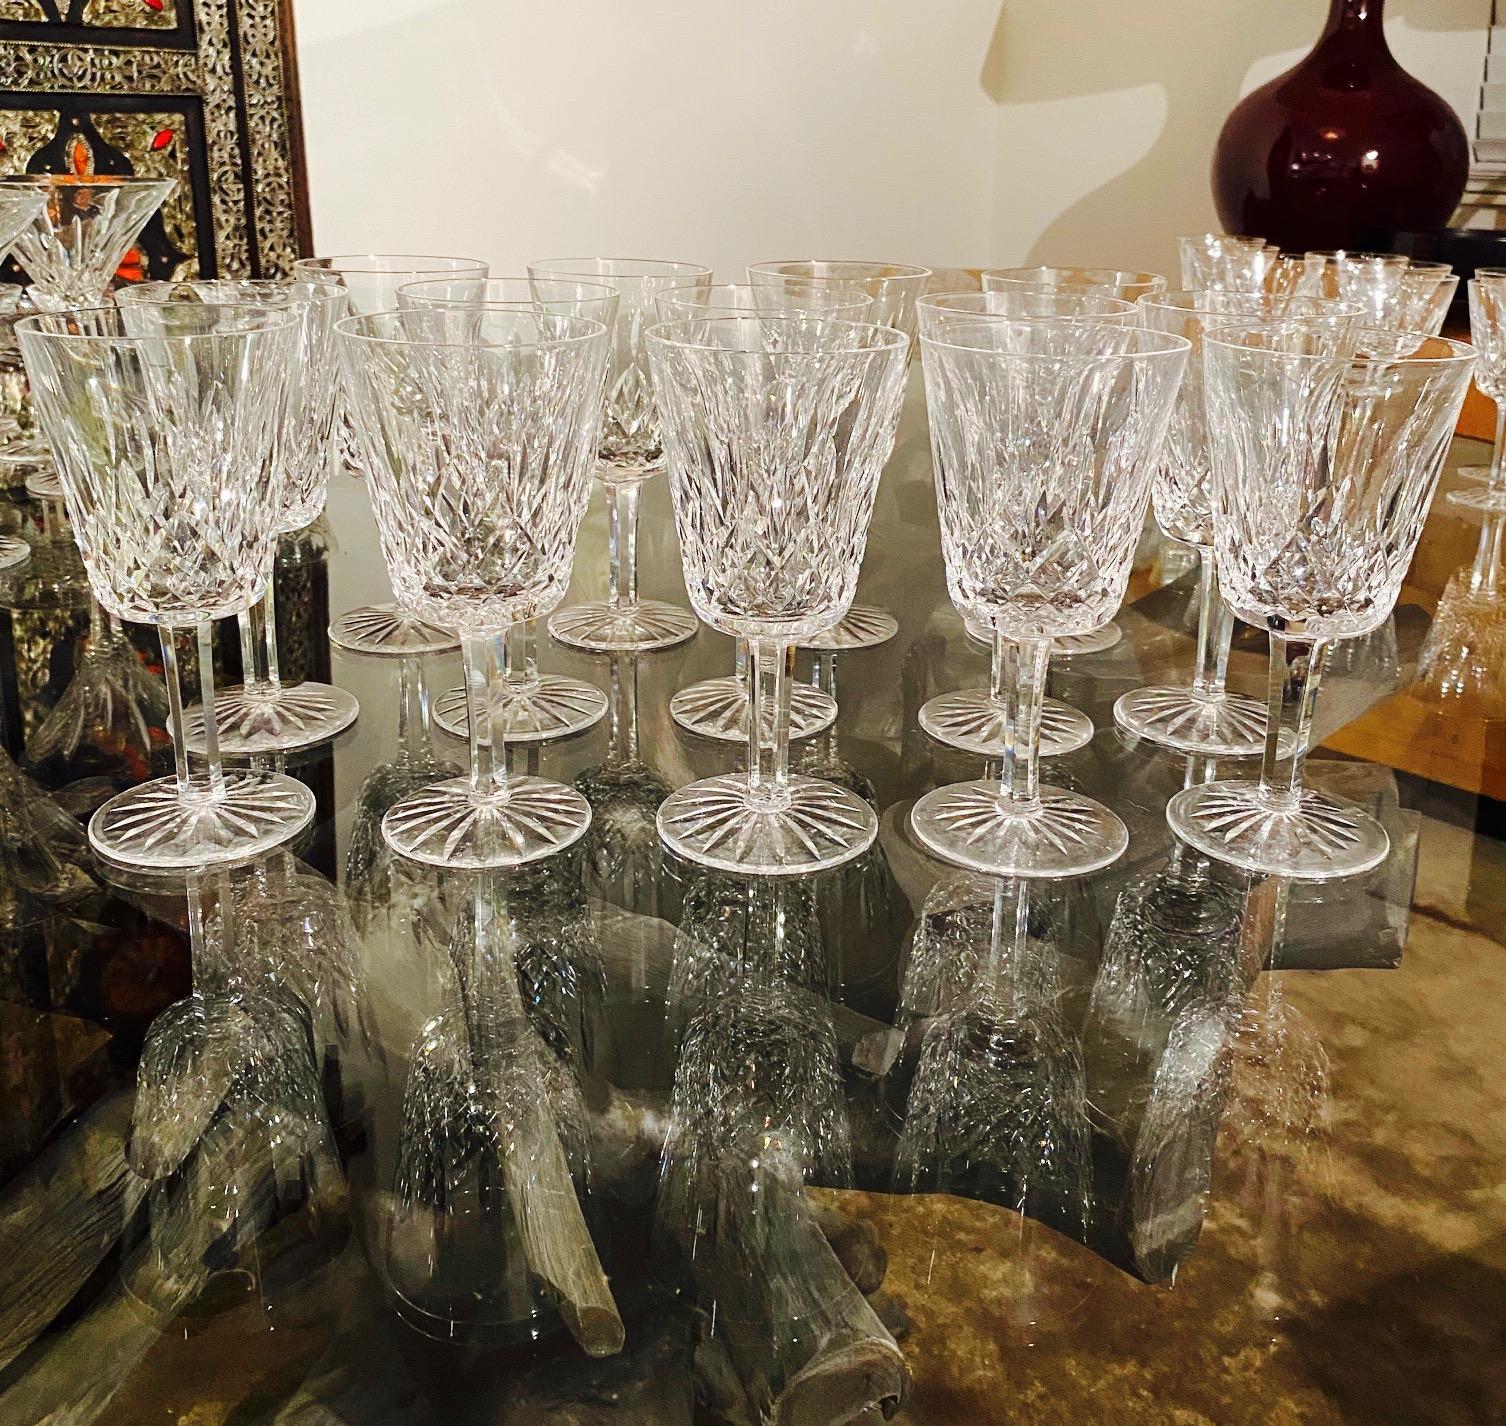 Set of fourteen luxury crystal water goblets from Waterford Crystal. The Lismore Collection is perhaps Waterford's most distinguished design featuring hand blown crystal with the pattern's signature diamond and wedge cuts. First introduced in the